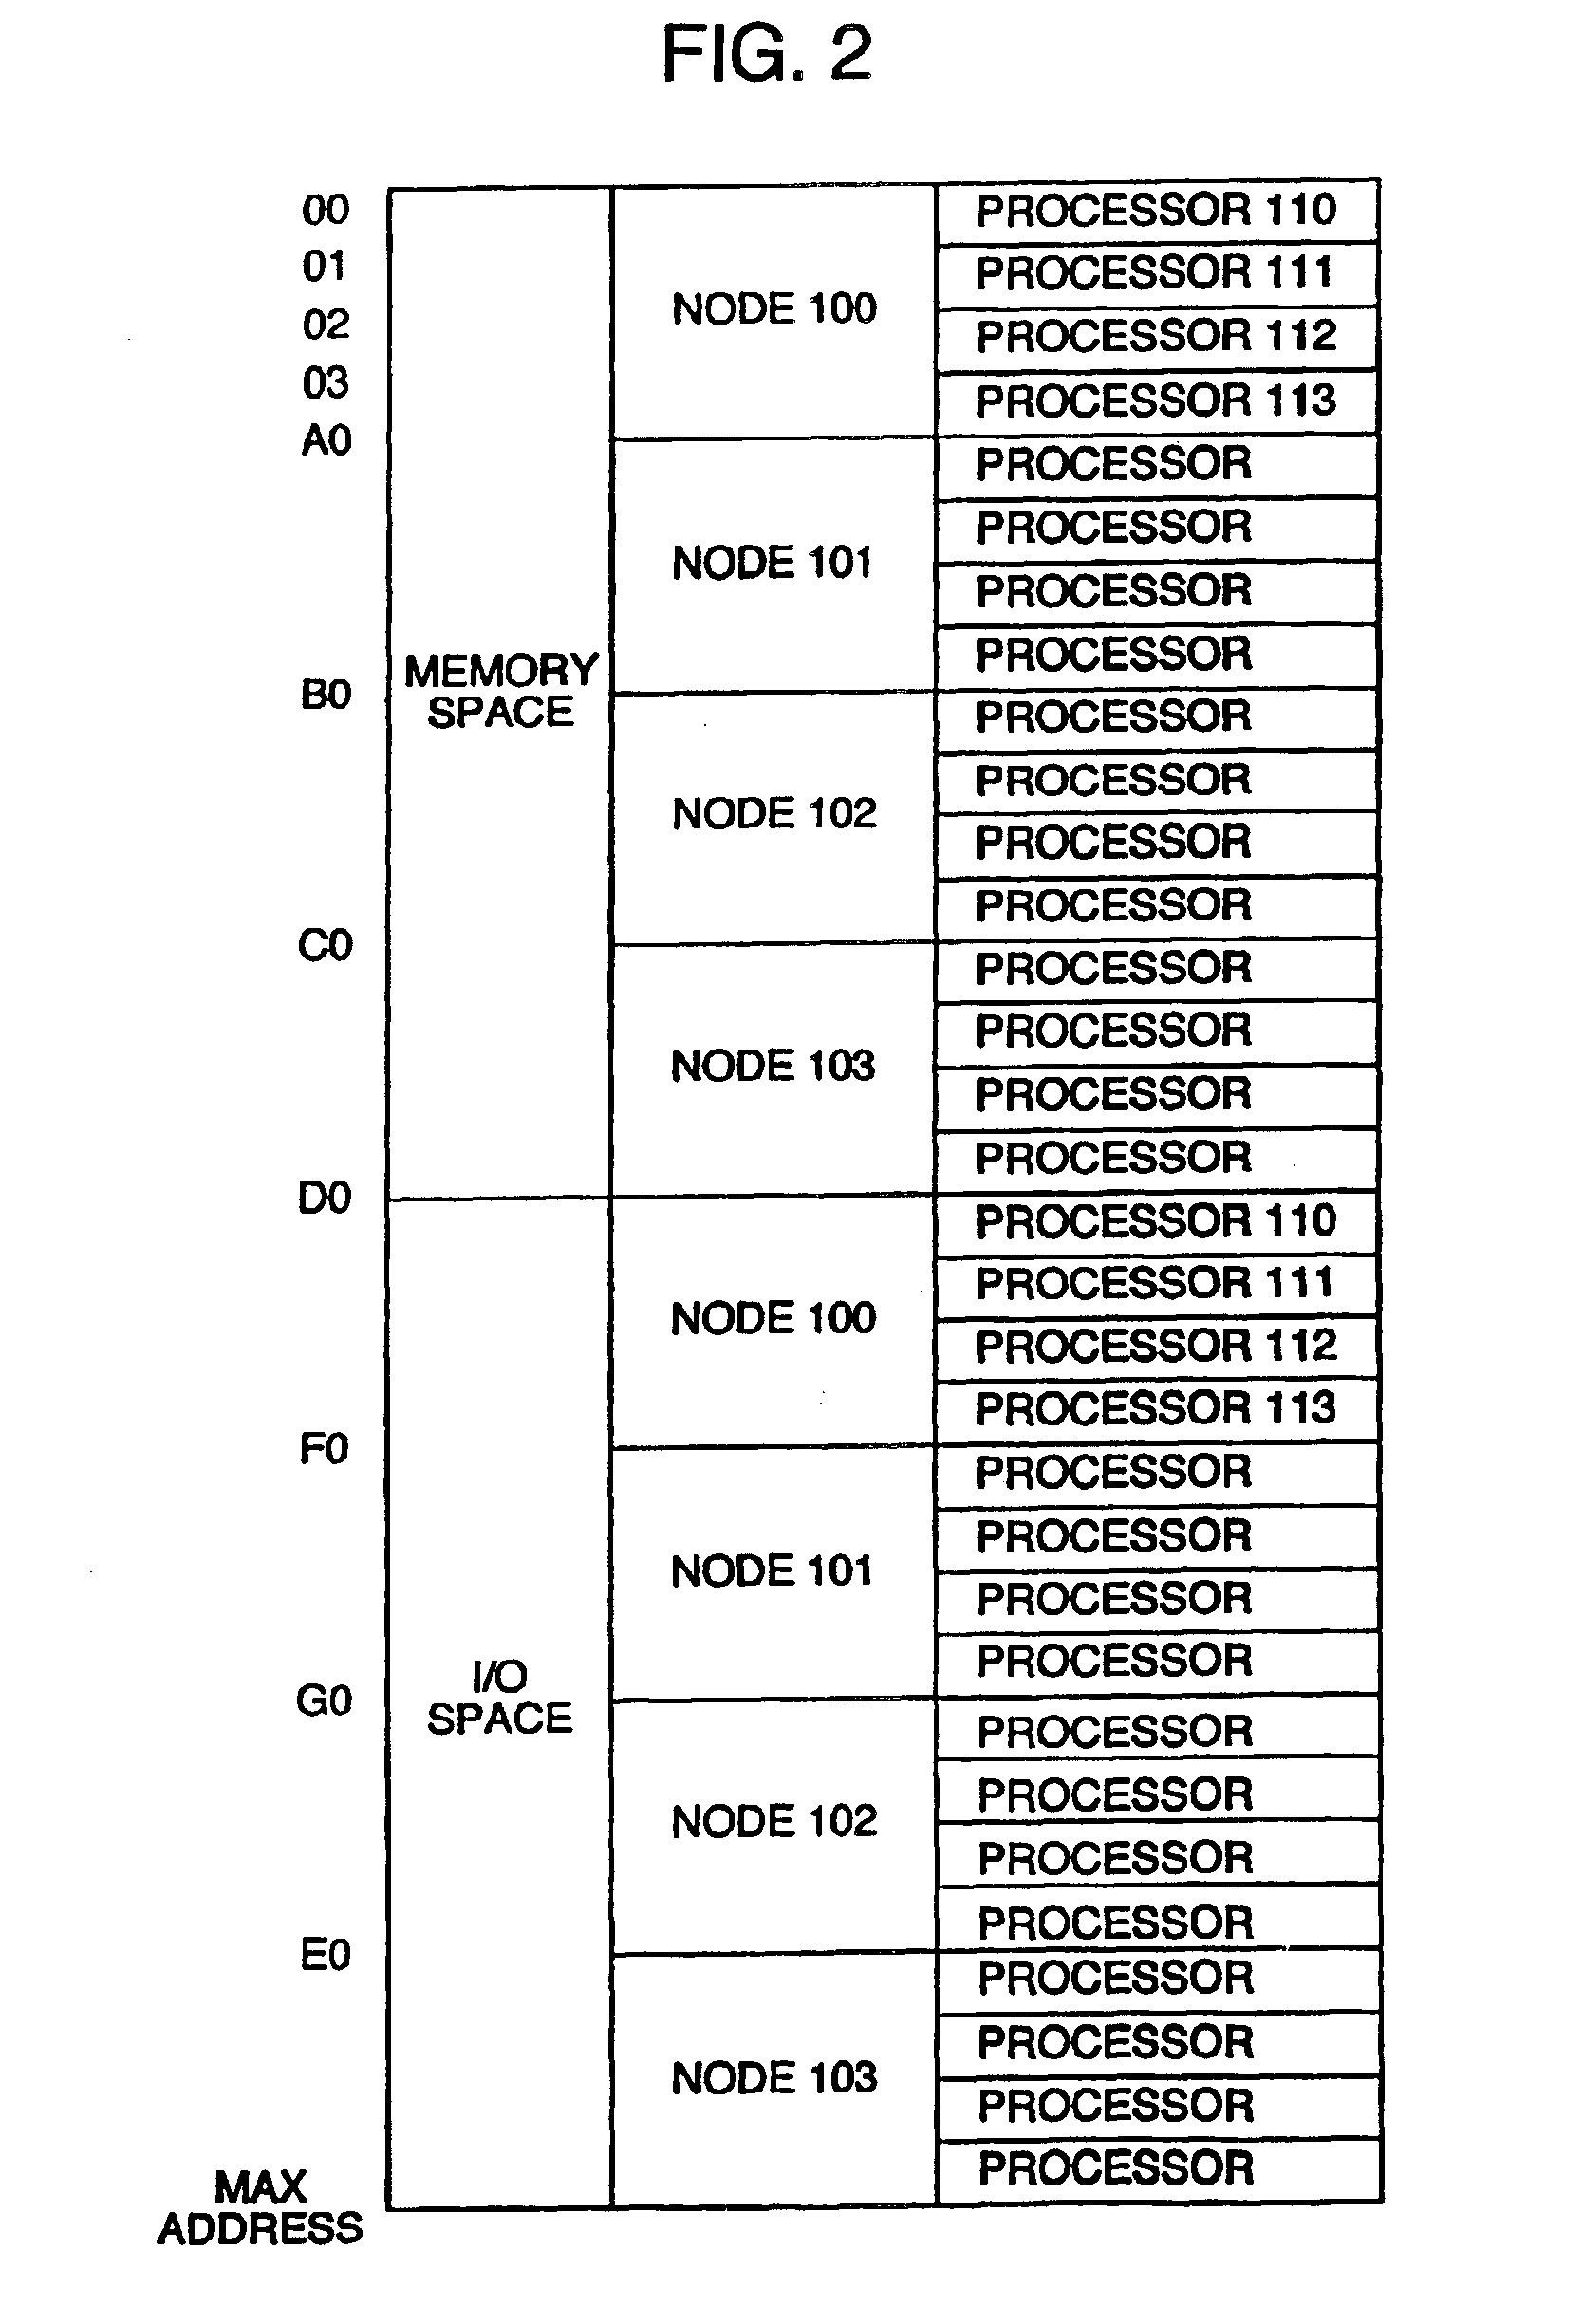 Shared memory multiprocessor performing cache coherence control and node controller therefor